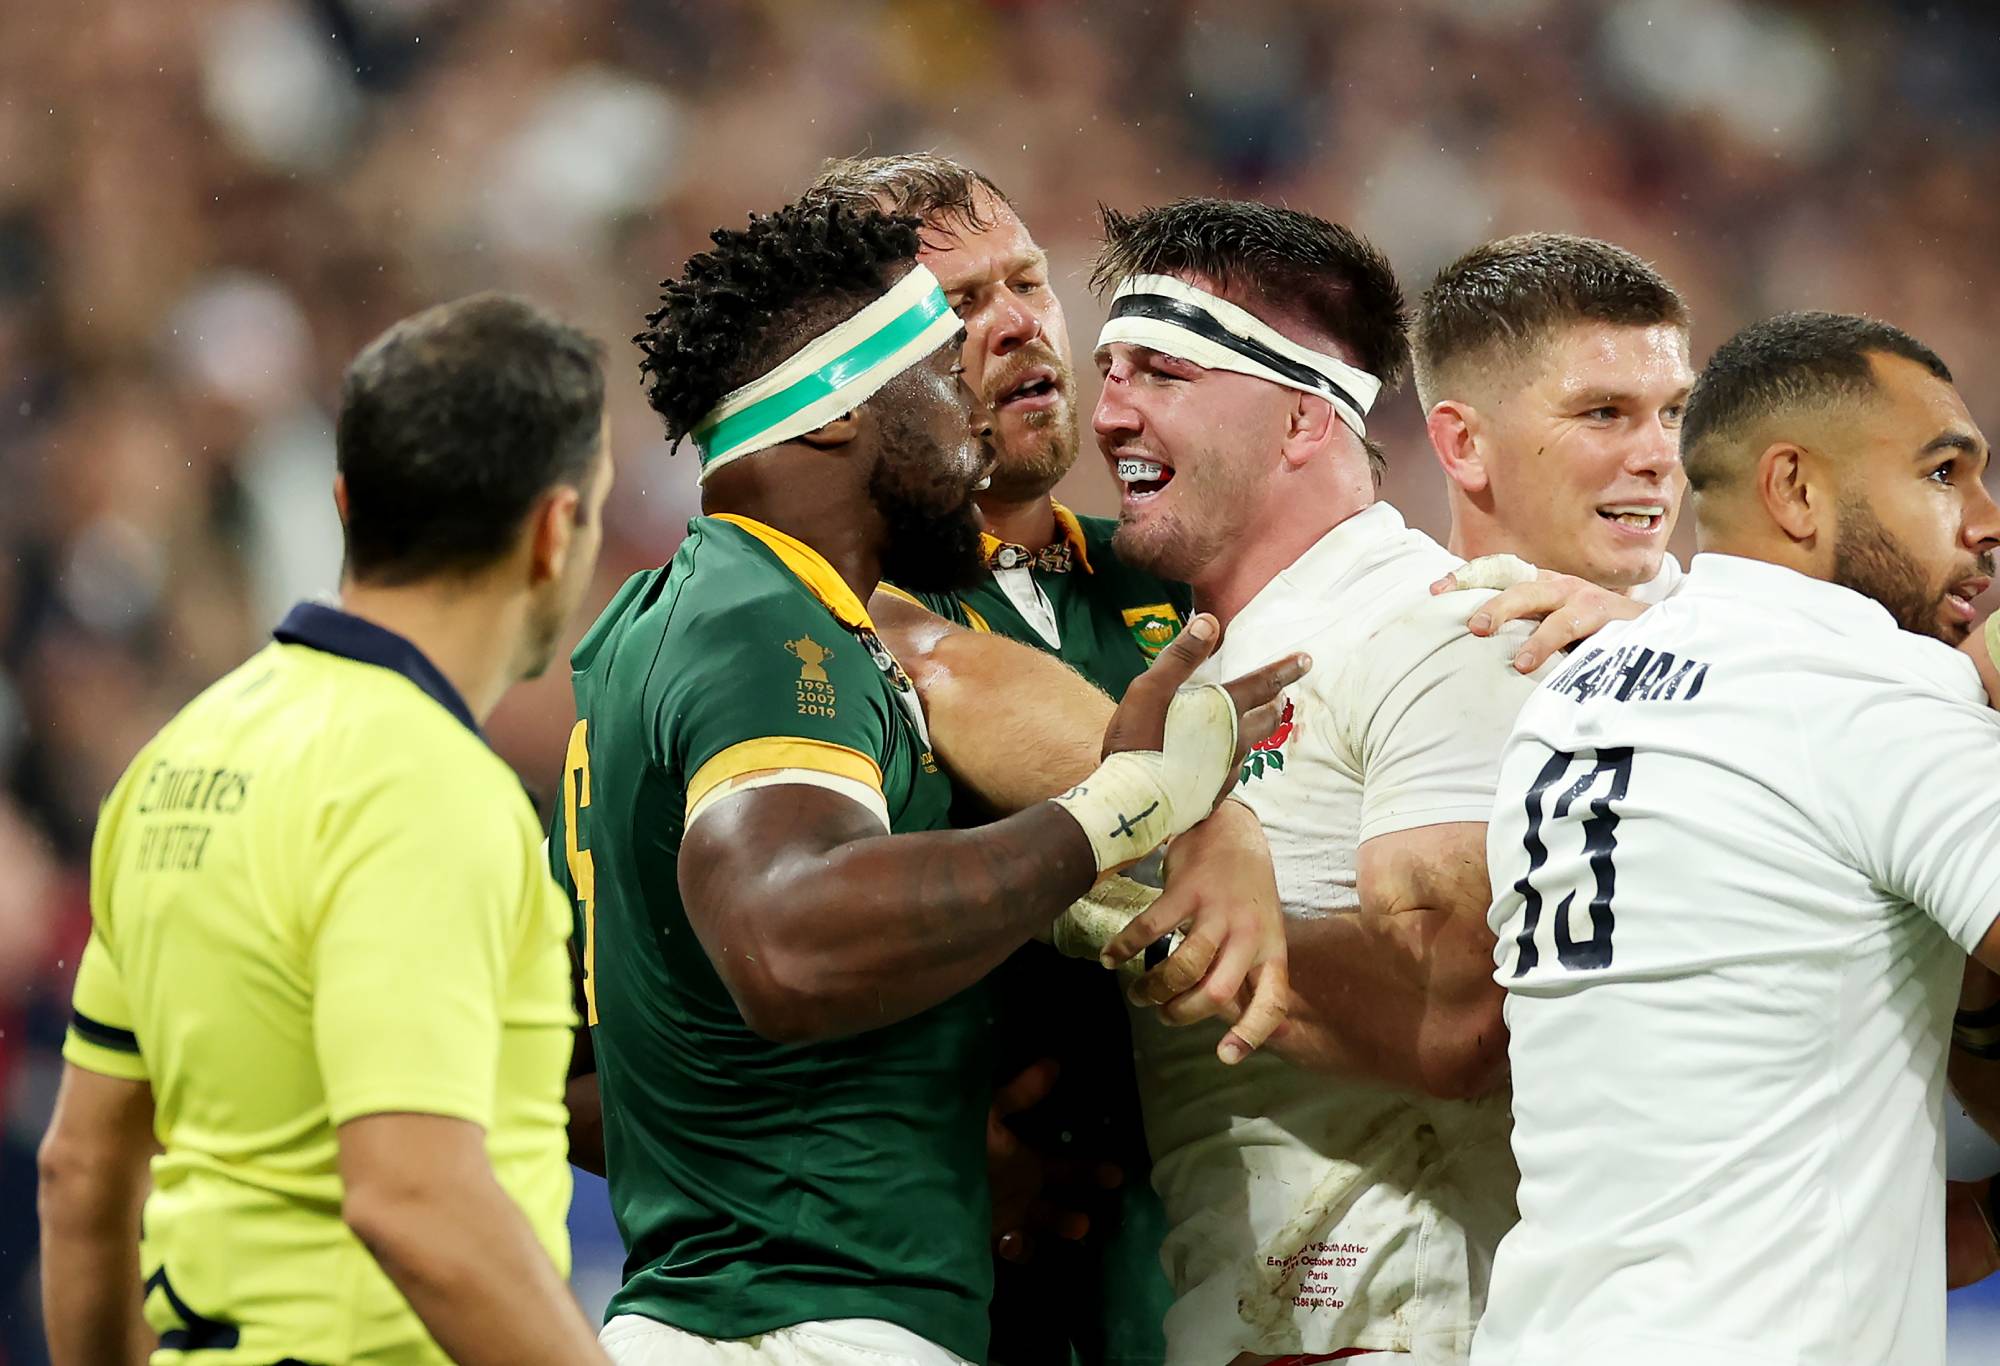 Siya Kolisi of South Africa clashes with Tom Curry of England during the Rugby World Cup France 2023 match between England and South Africa at Stade de France on October 21, 2023 in Paris, France. (Photo by Cameron Spencer/Getty Images)